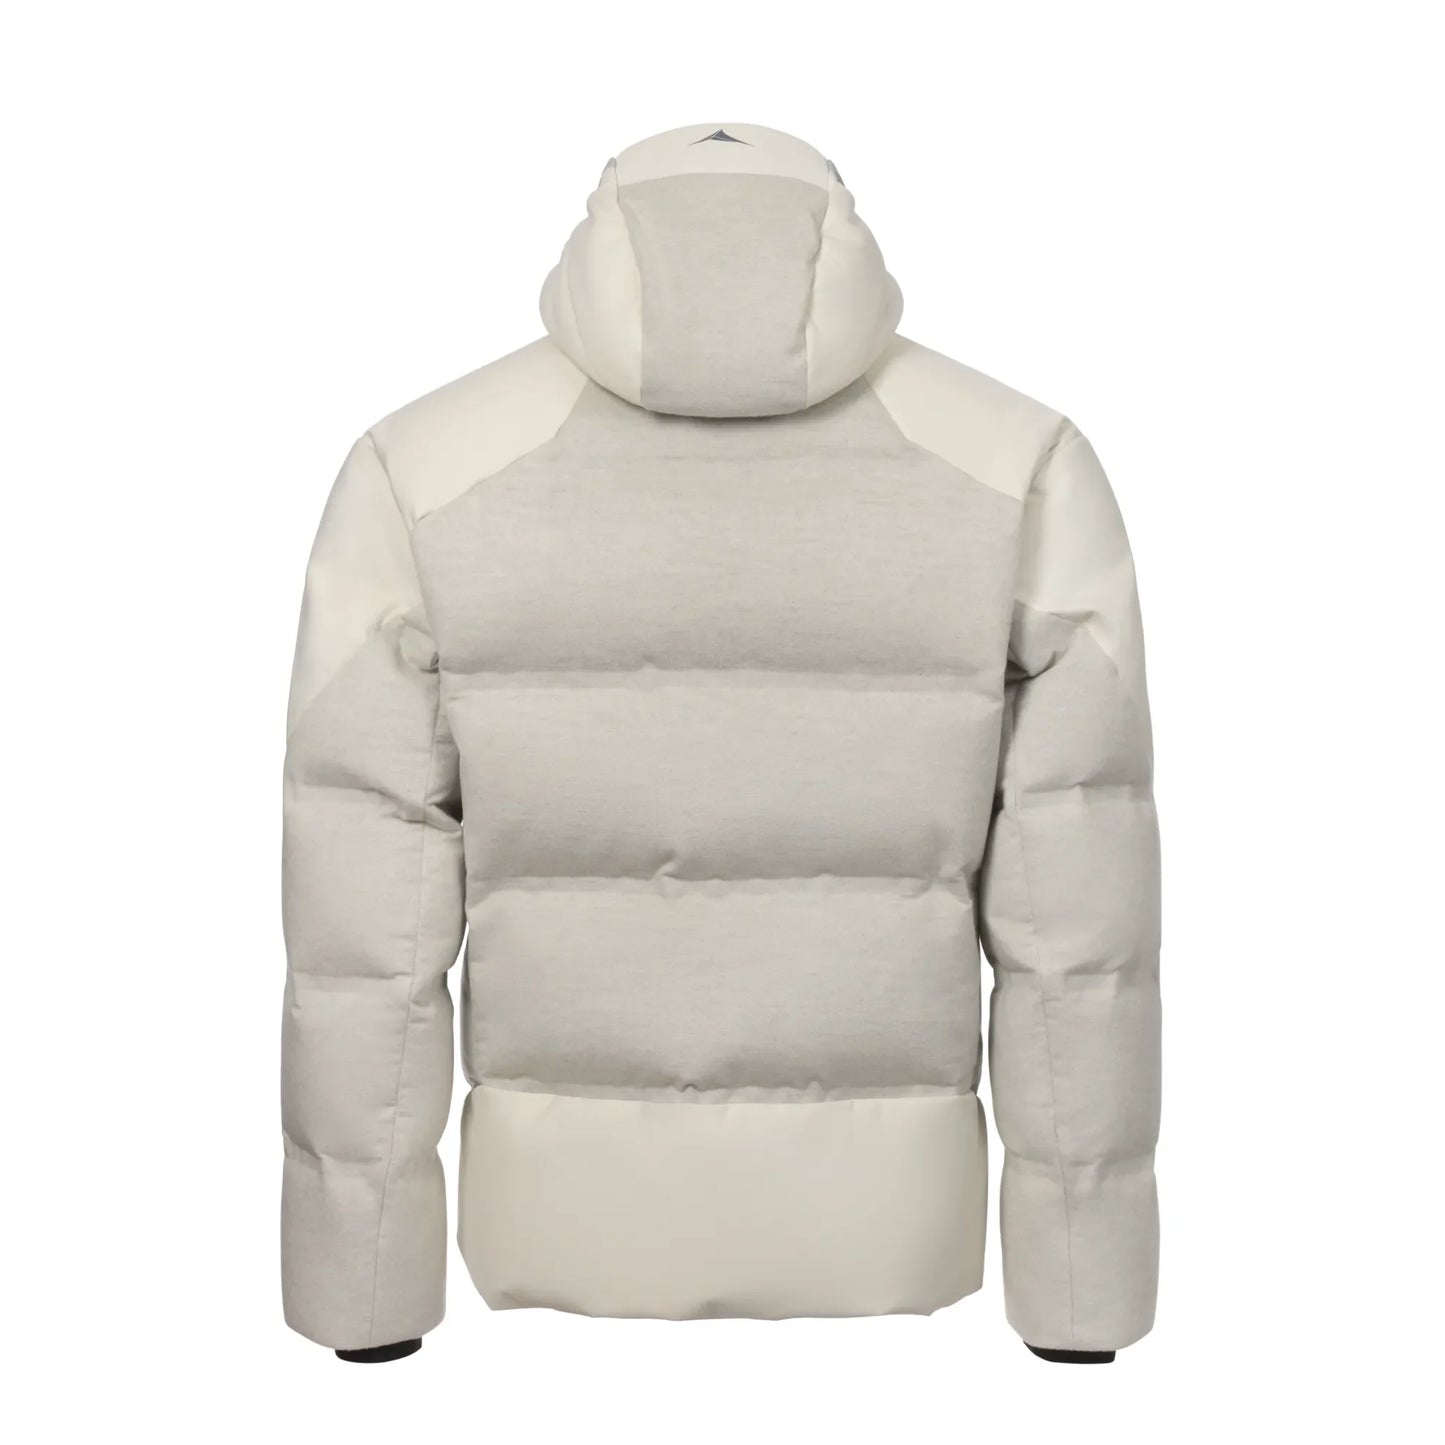 "Vampire" Insulated Cashmere and Wool Hooded Down Jacket